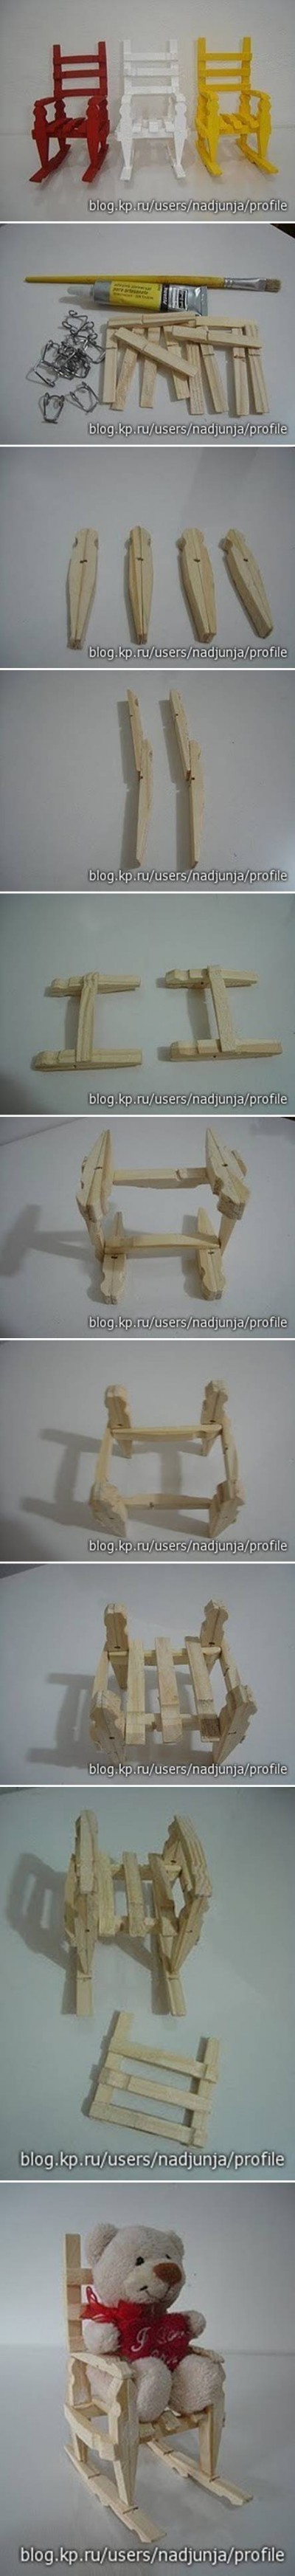 How to build Clothespin Rocking Chair step by step DIY instructions